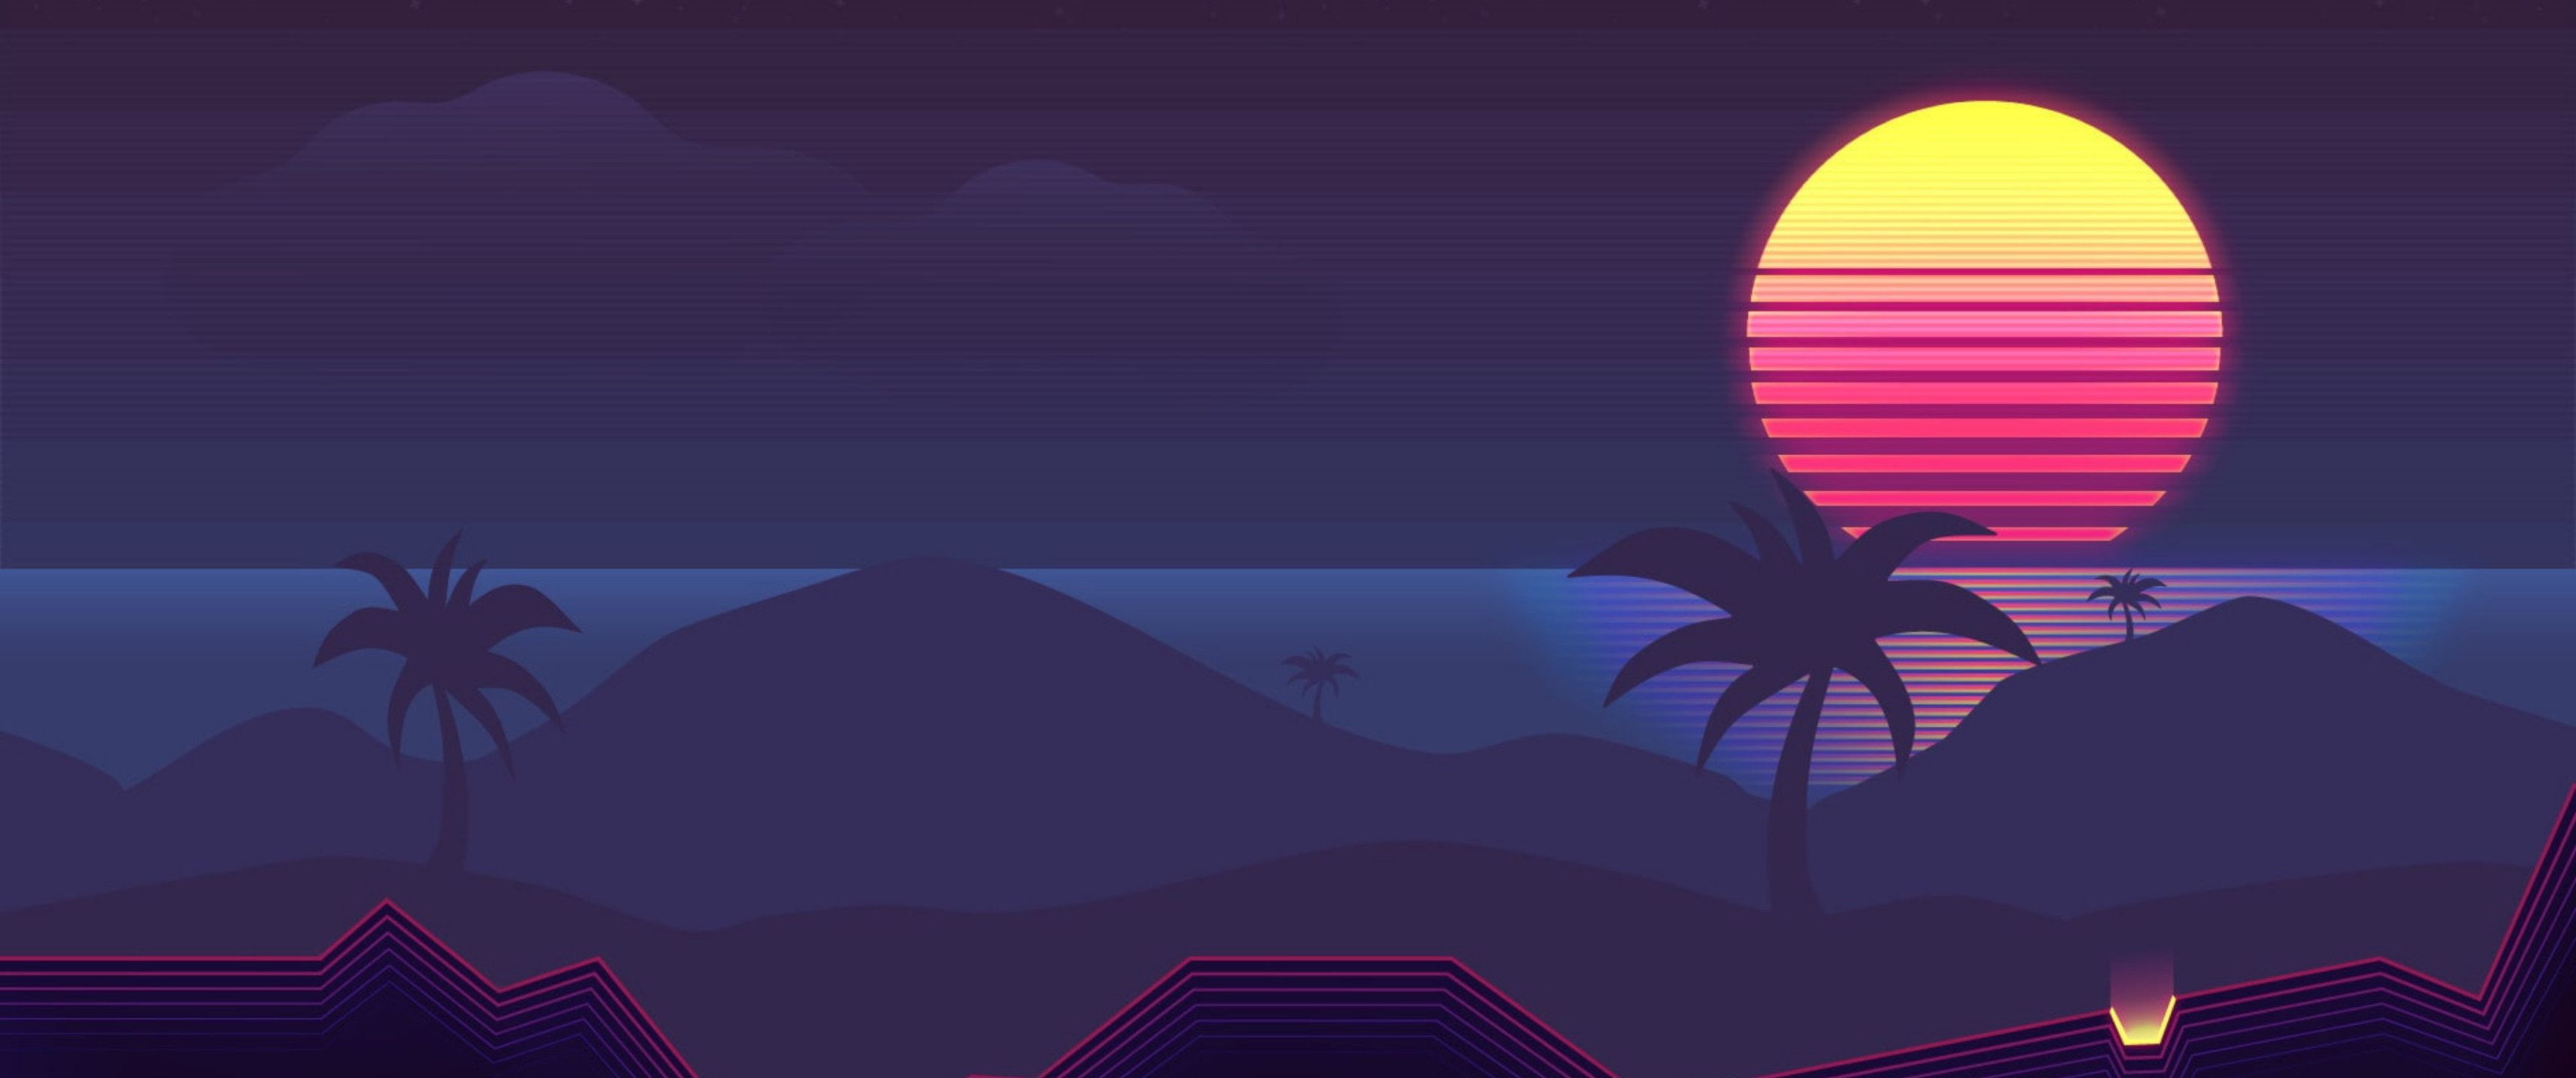 Synthwave wallpaper with palm trees, mountains and a sunset - 3440x1440